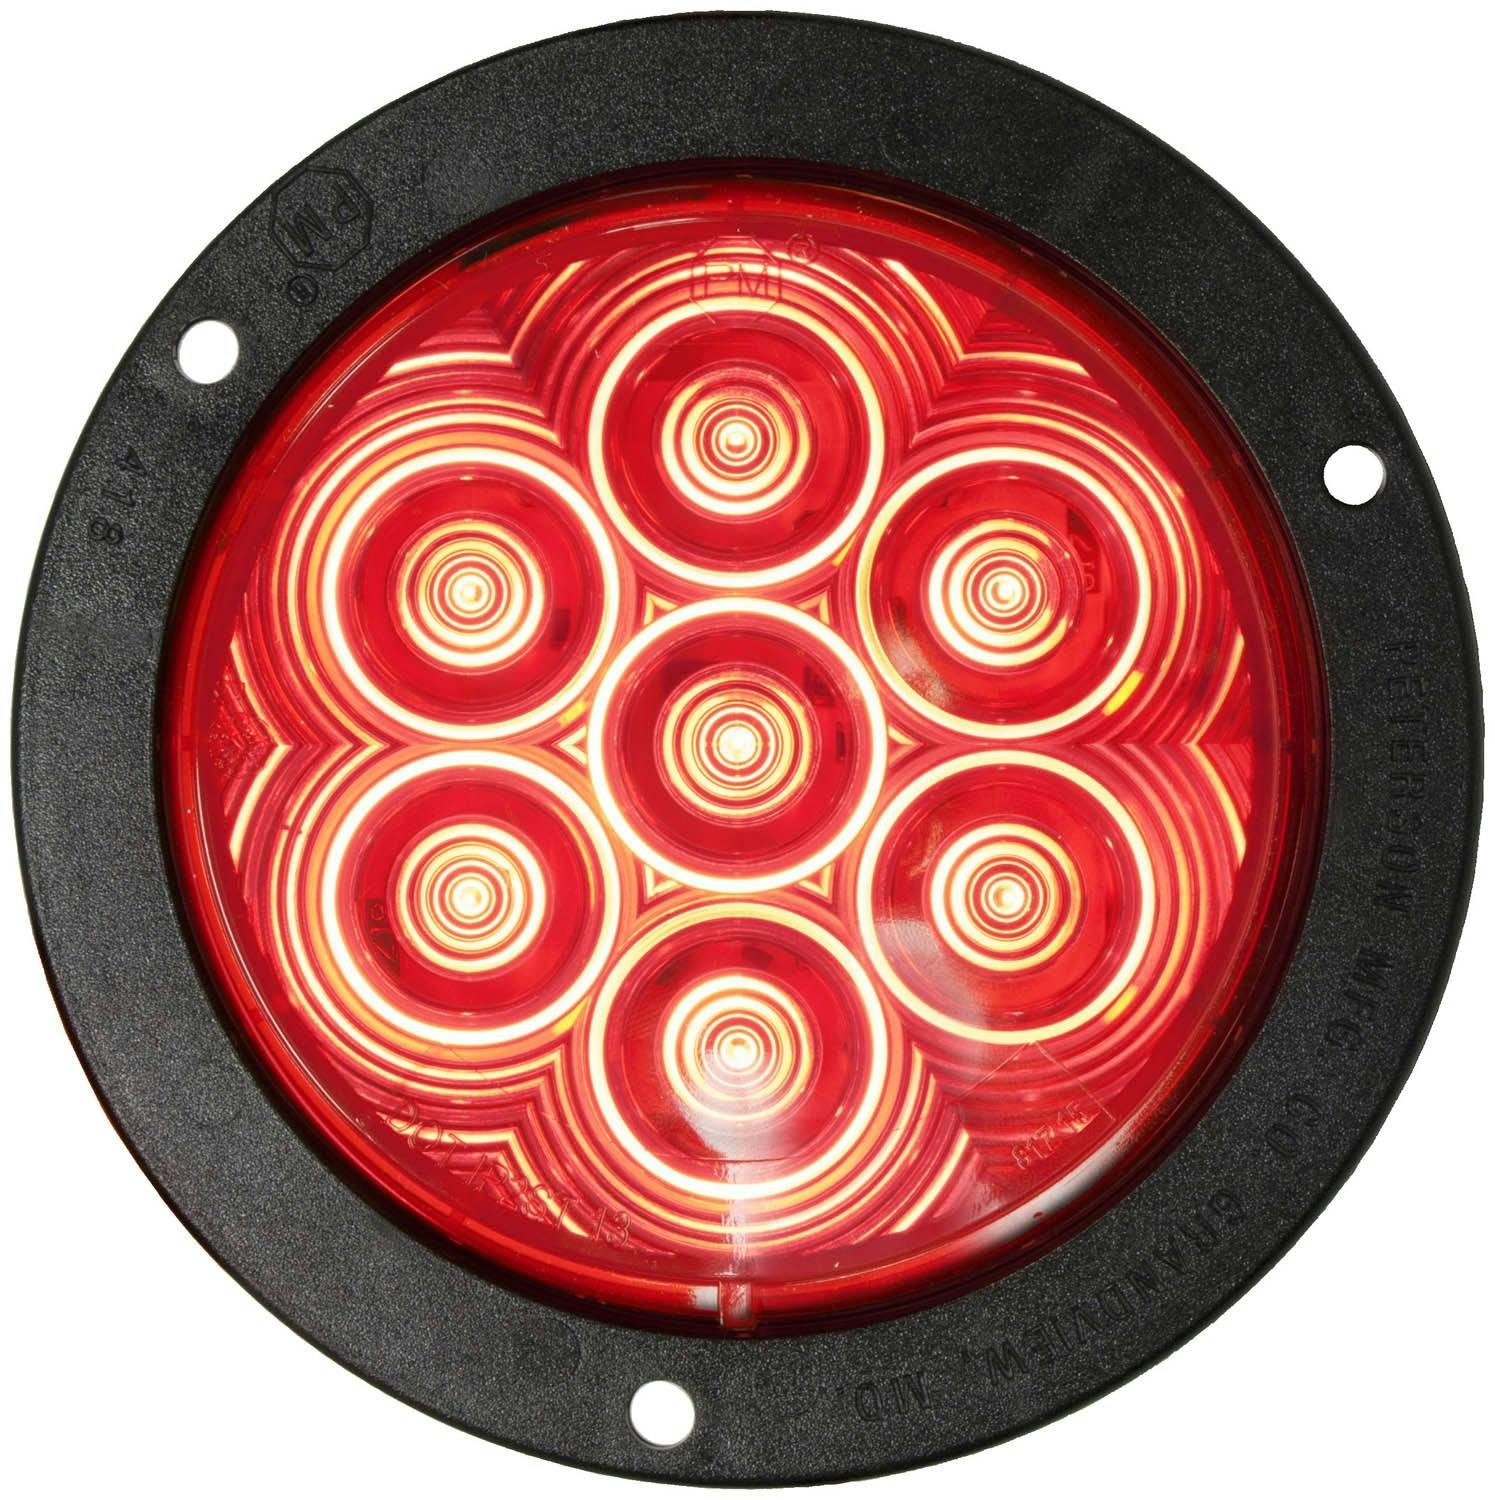 LED Stop/Turn/Tail, Round, AMP, Flange-Mount 4", red, bulk pack (Pack of 50)